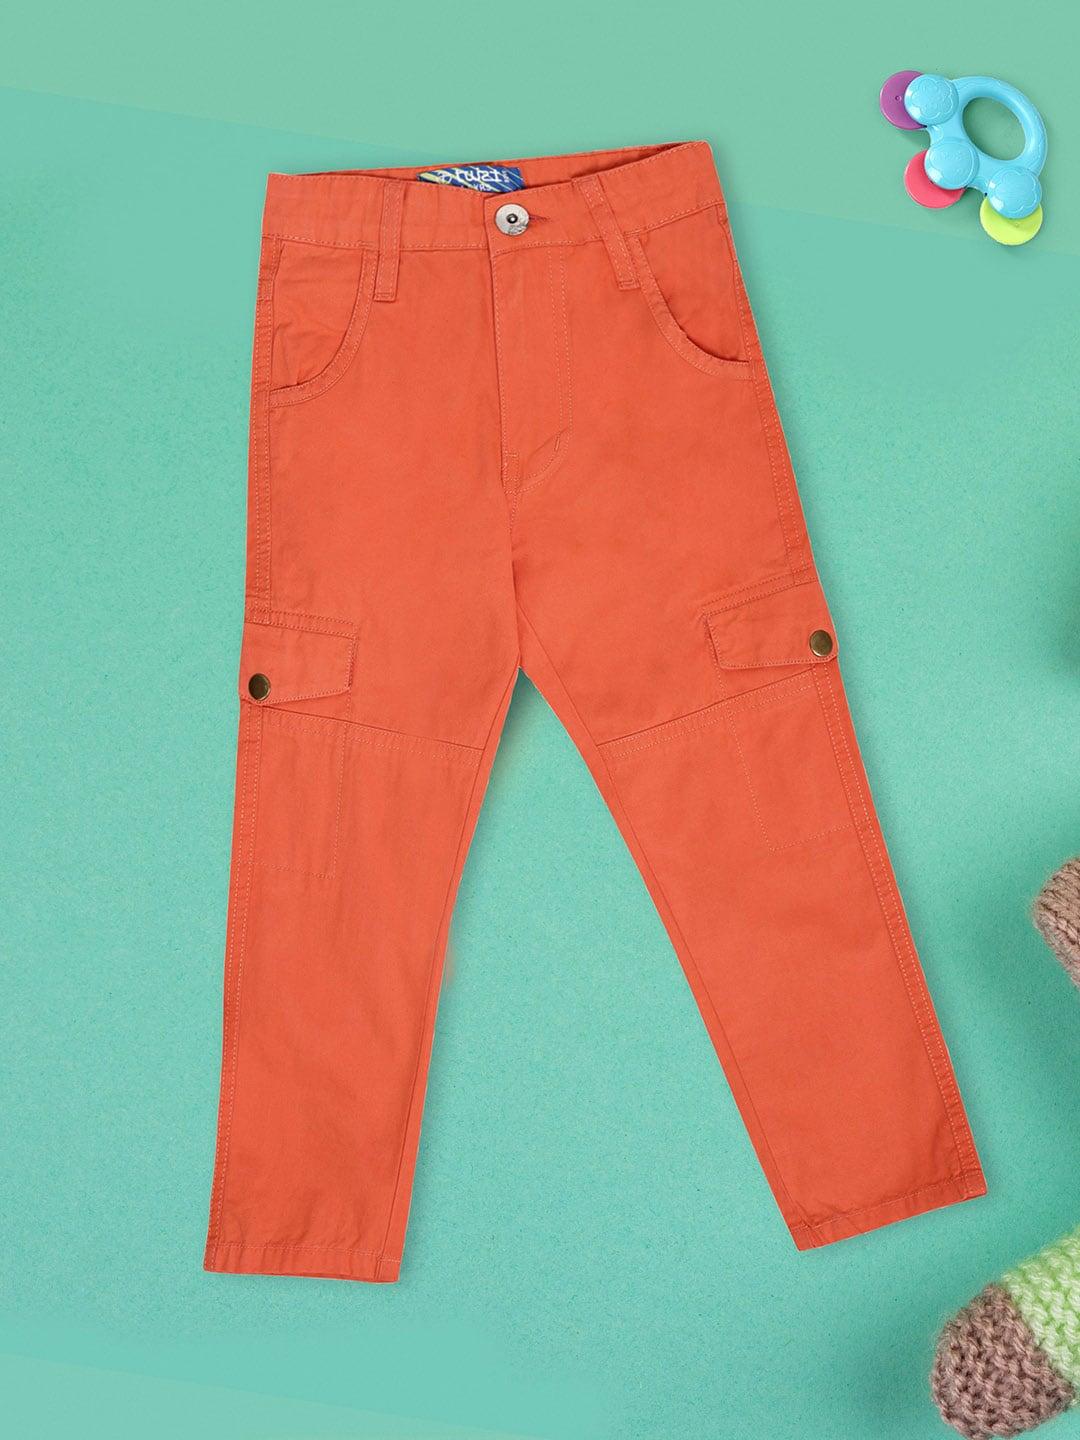 V-Mart Boys Twill Mid-Rise Cotton Cargos Trousers